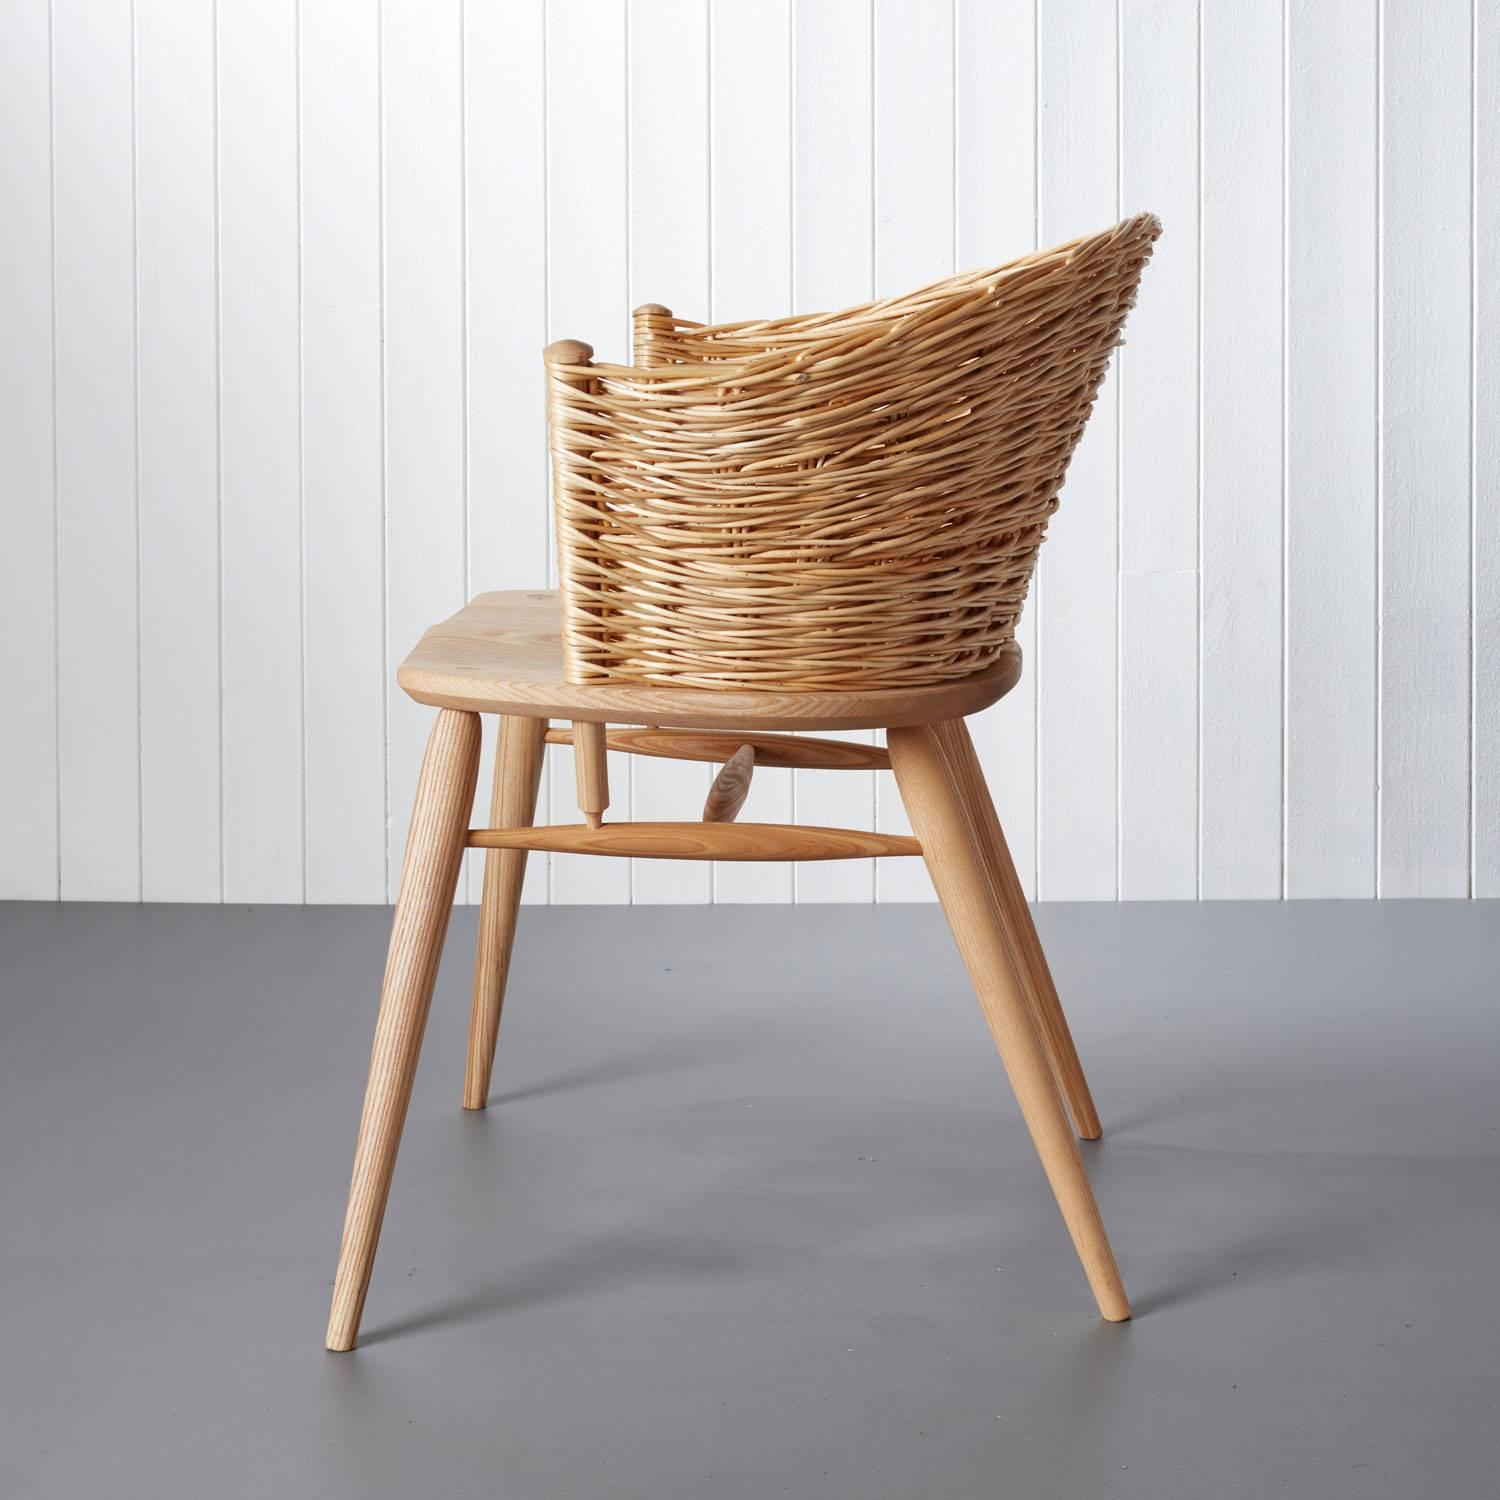 The “Willow” chair by British furniture maker Gareth Neal & master basket weaver Annemarie O’Sullivan- a unique collaboration with The New Craftsmen, made exclusively for Decorex, 2016.

The "Willow" chair is a unique piece